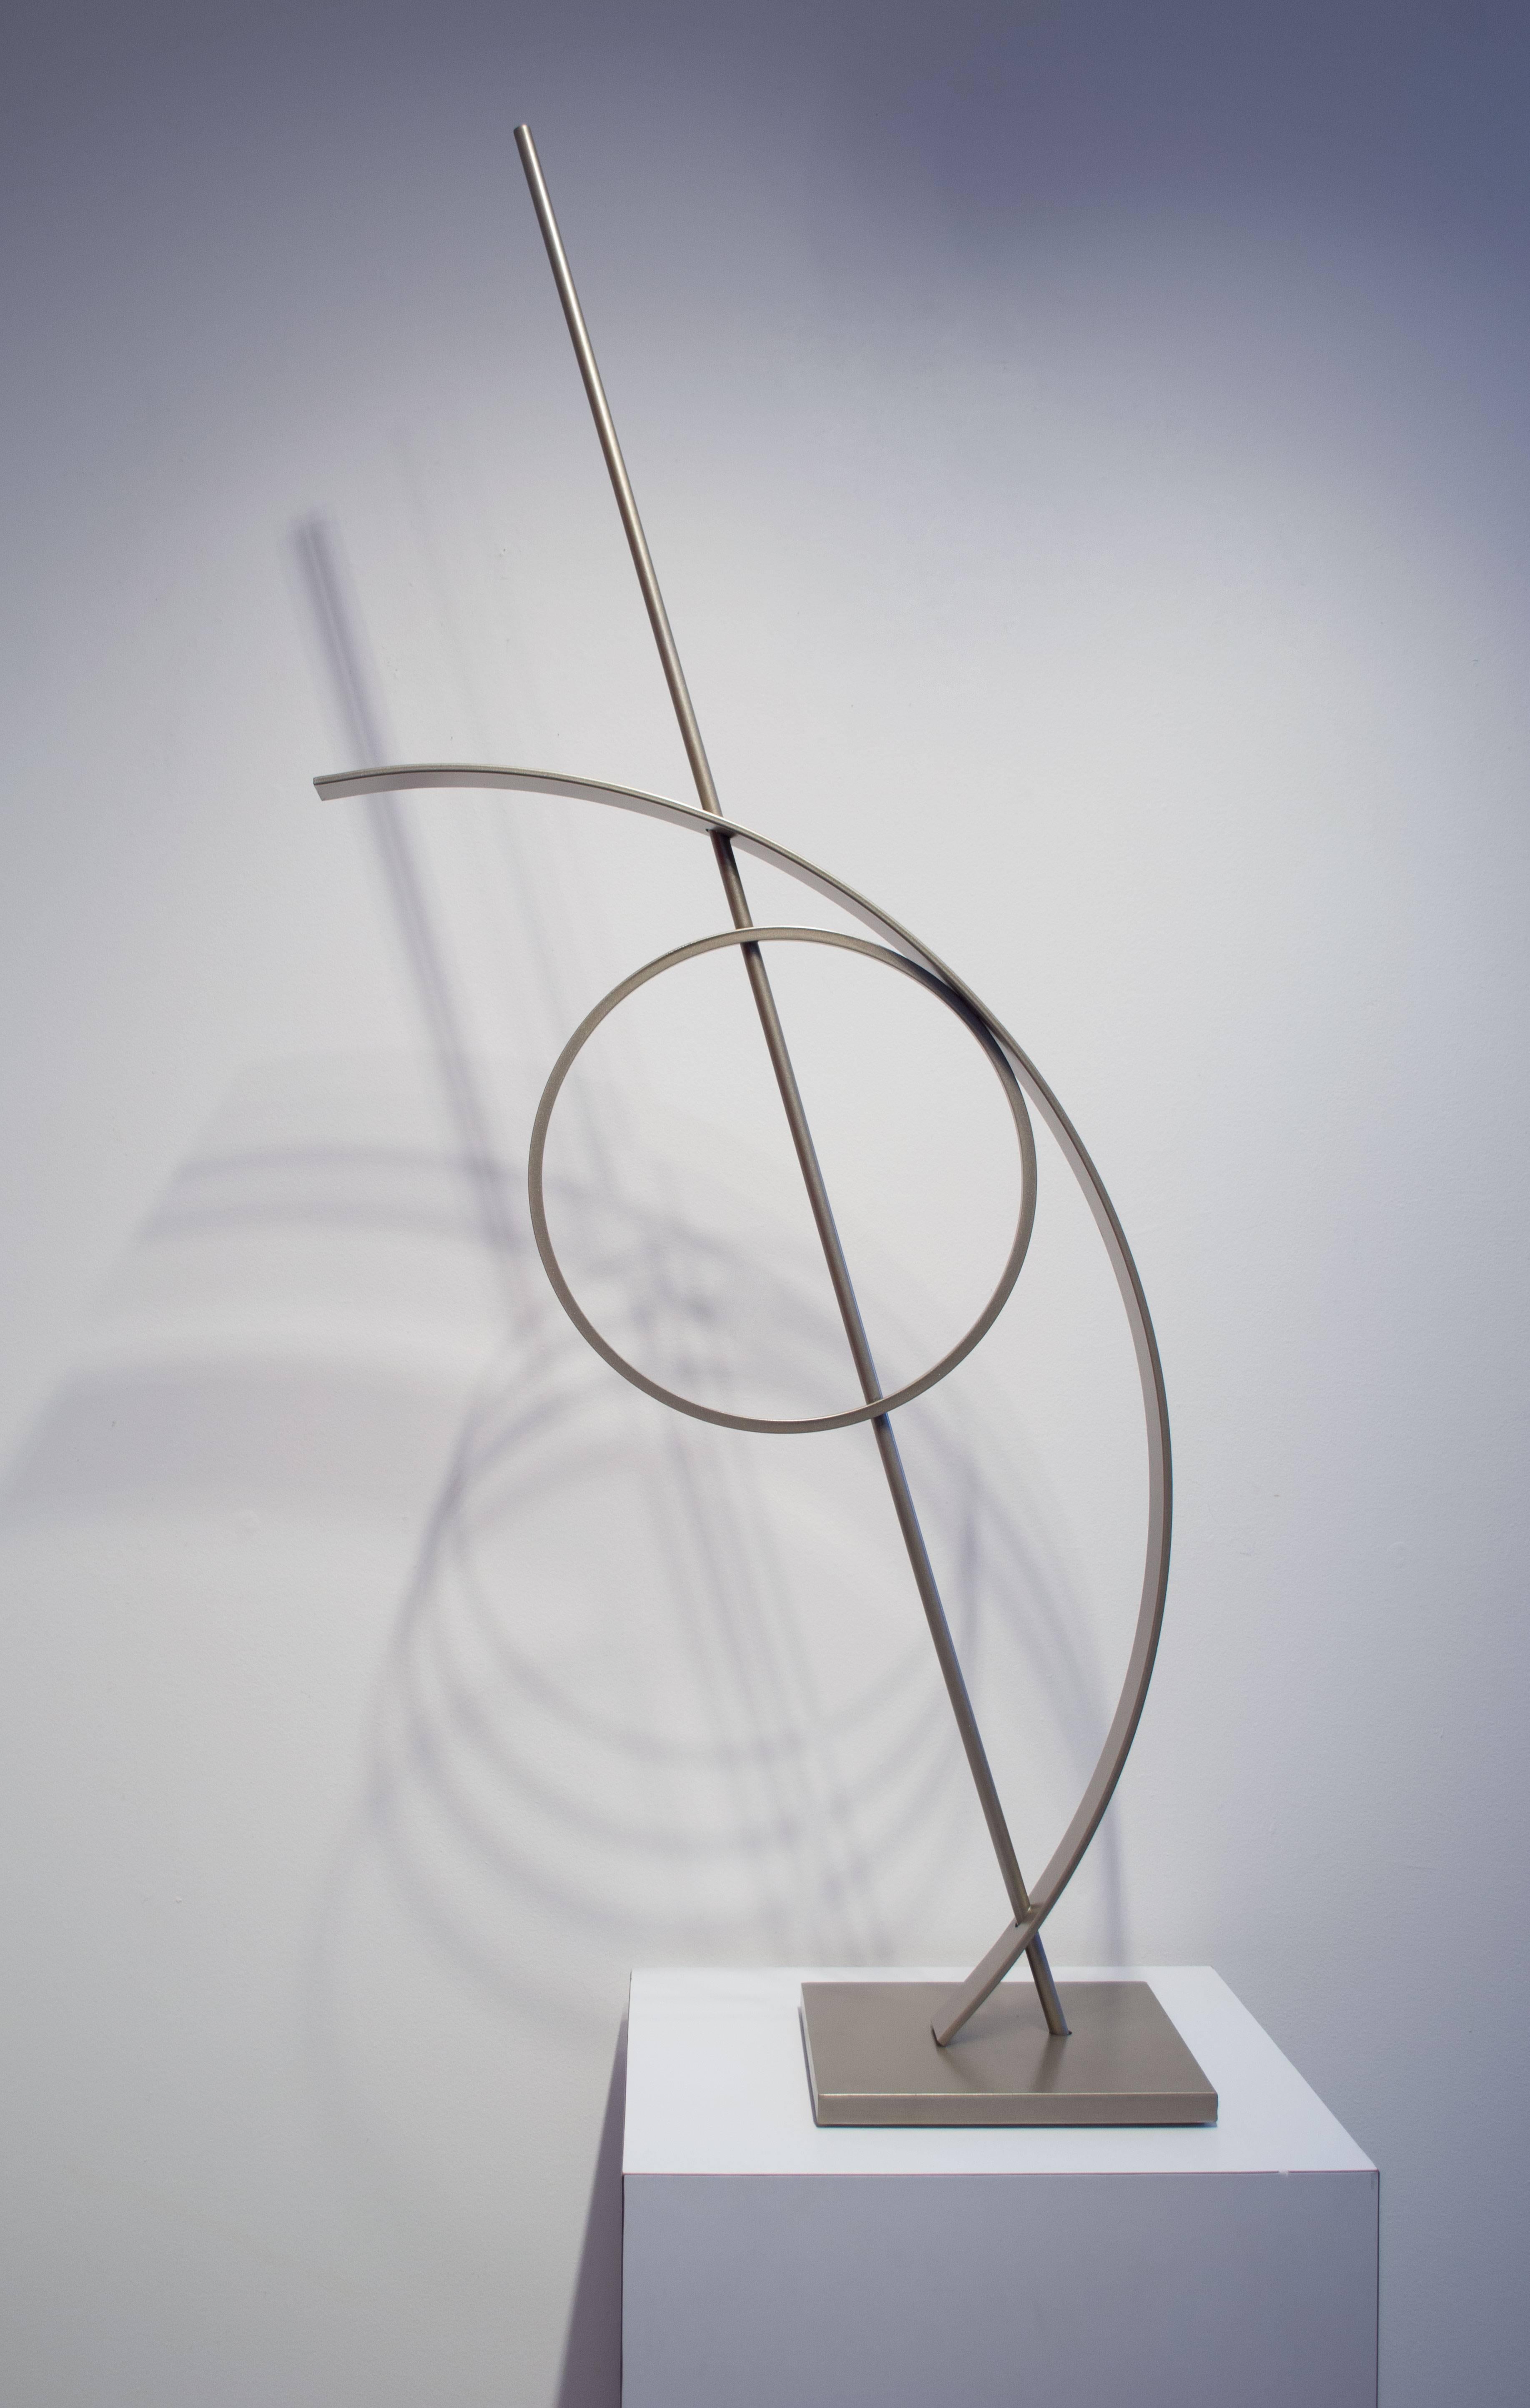 Tangent - Sculpture by Michael Freed and Adam Rosen